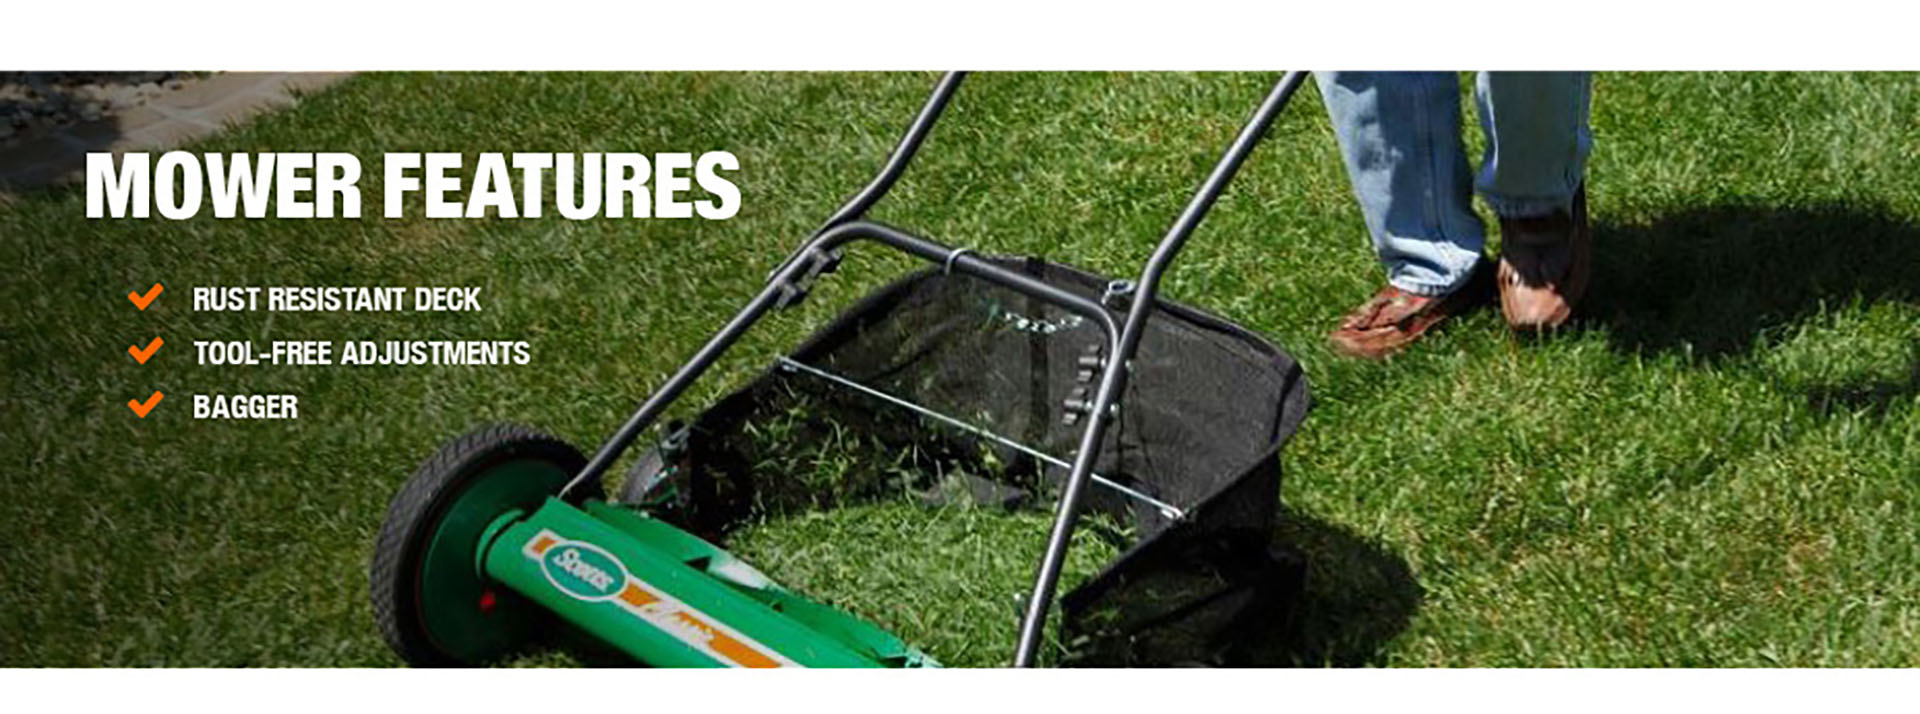 Scotts 20 in. Manual Walk Behind Reel Mower with Grass Catcher-2010